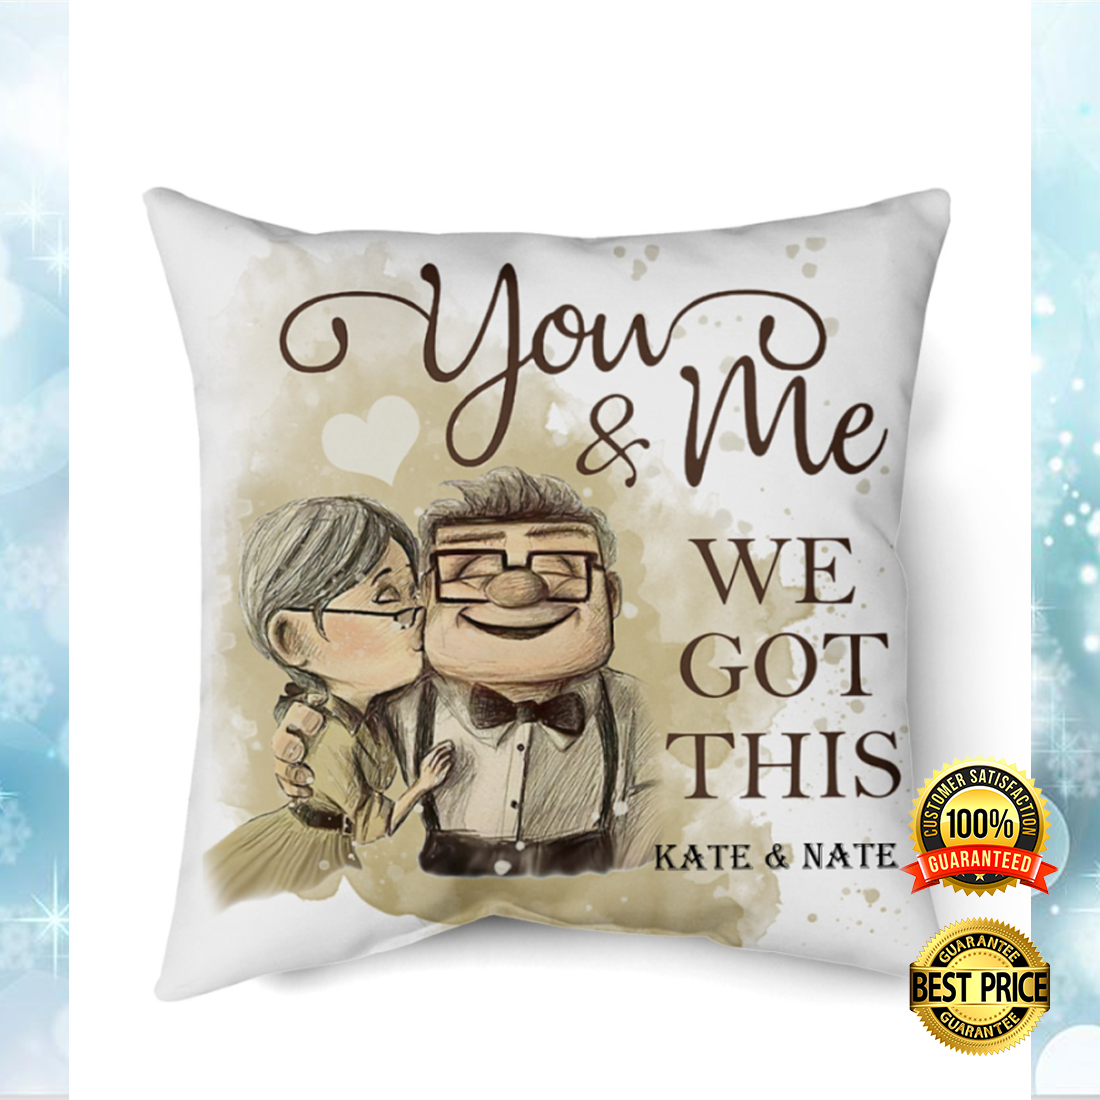 Personalized Up you and me we got this pillow